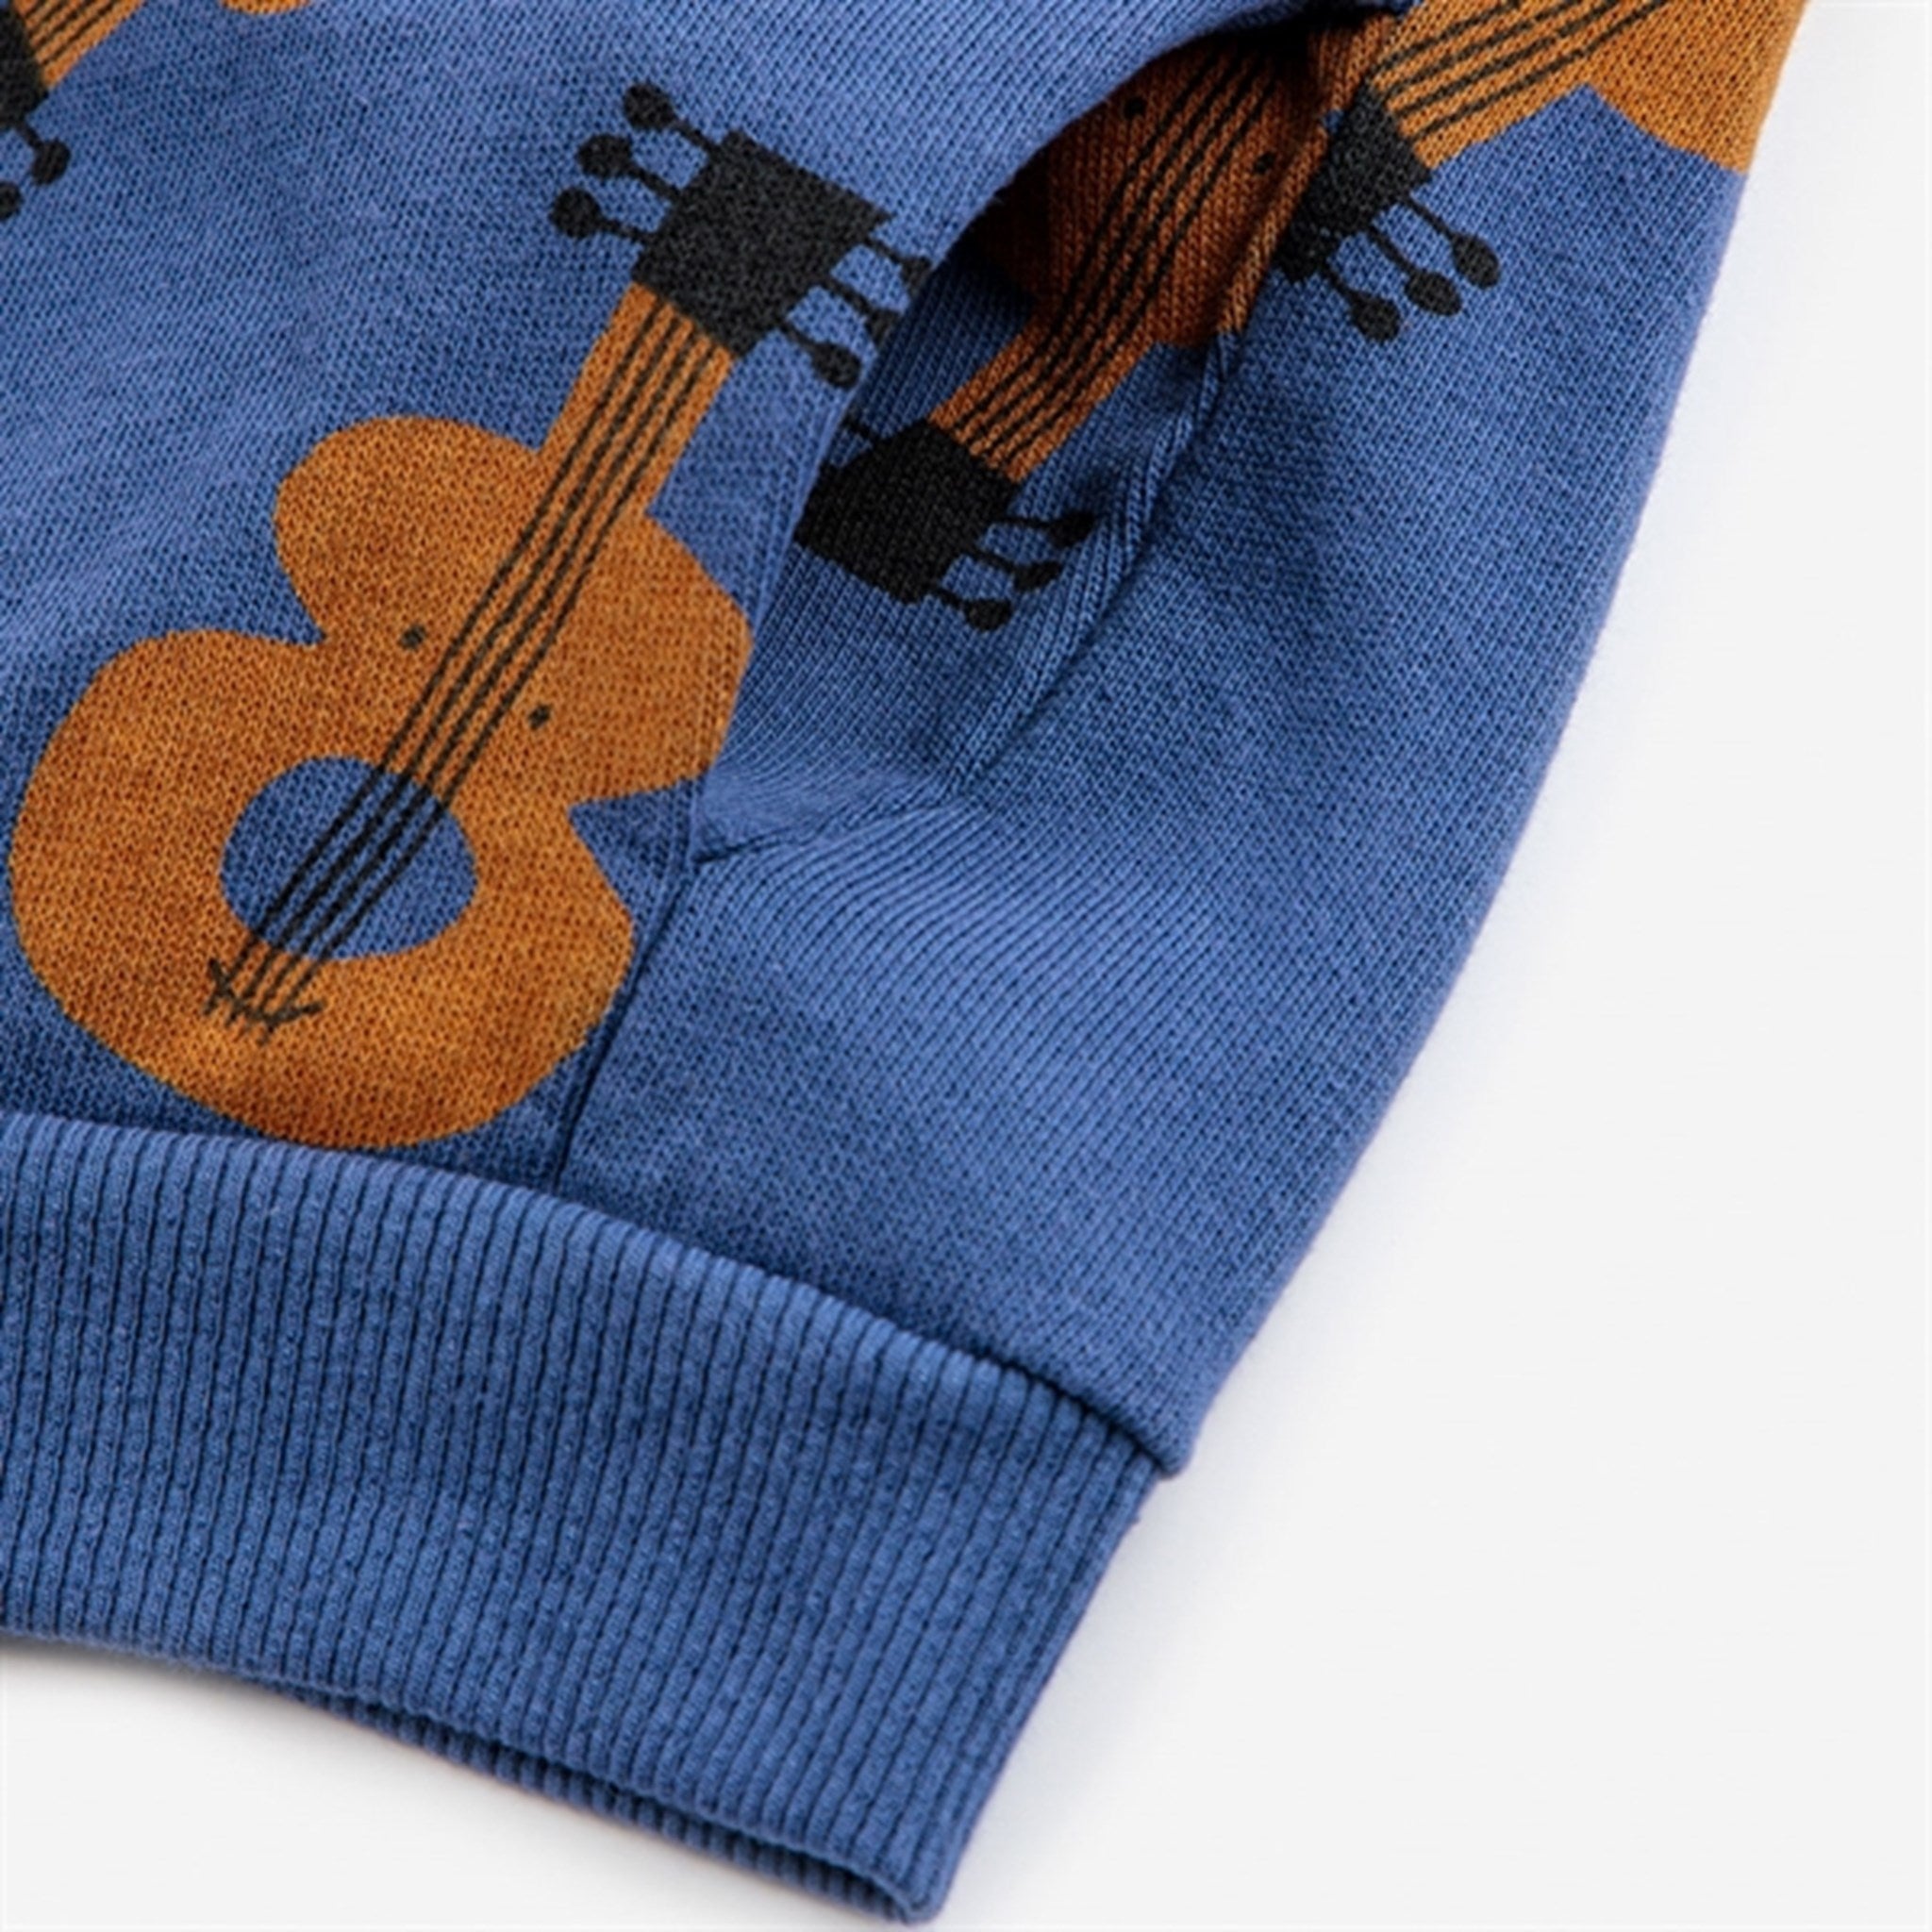 Bobo Choses Acoustic Guitar All Over Zipped Hoodie Navy Blue 8